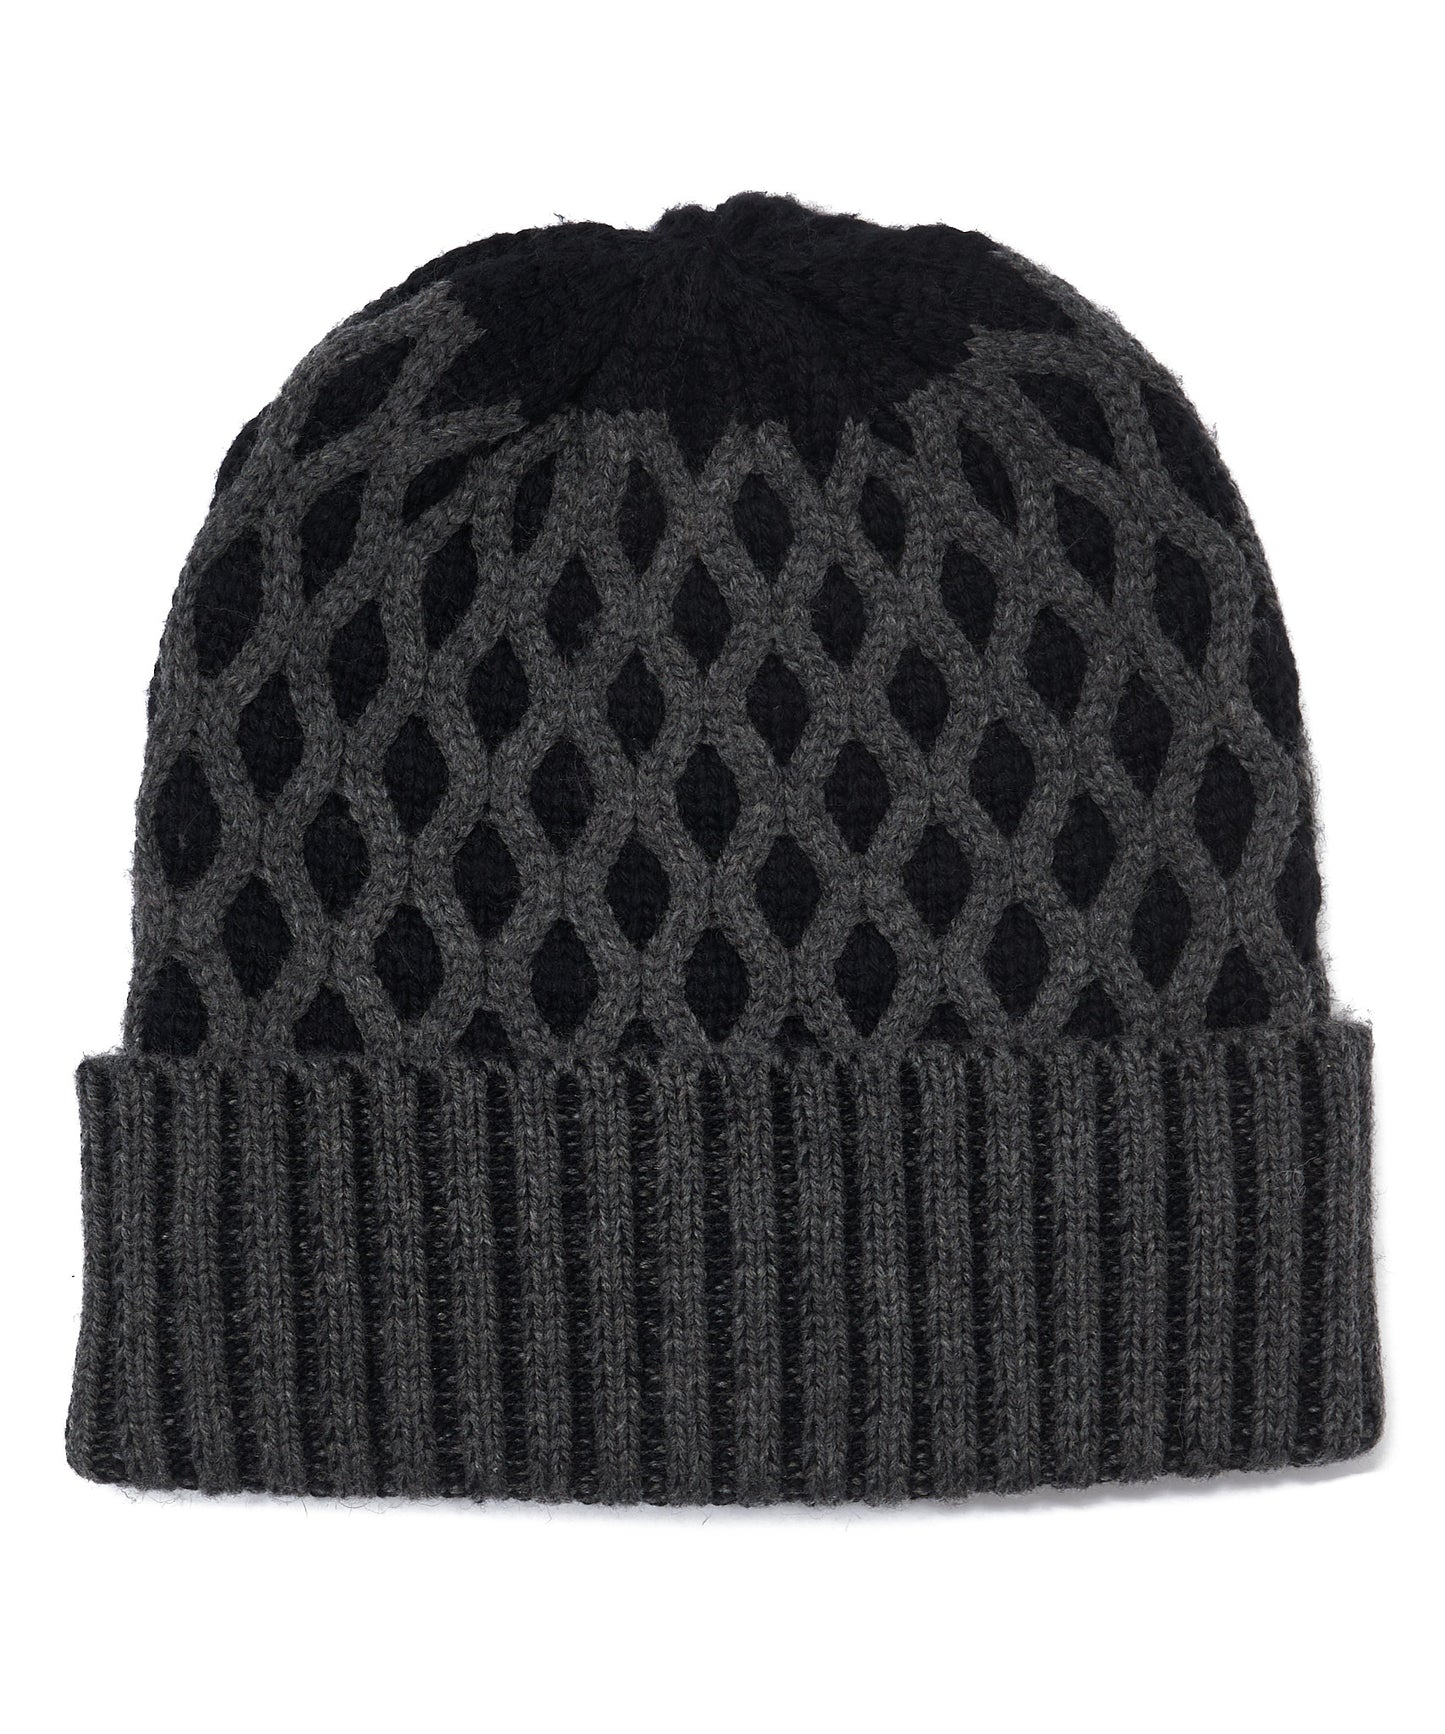 Recycled Bi-color Honeycomb Beanie in color Black/Charcoal